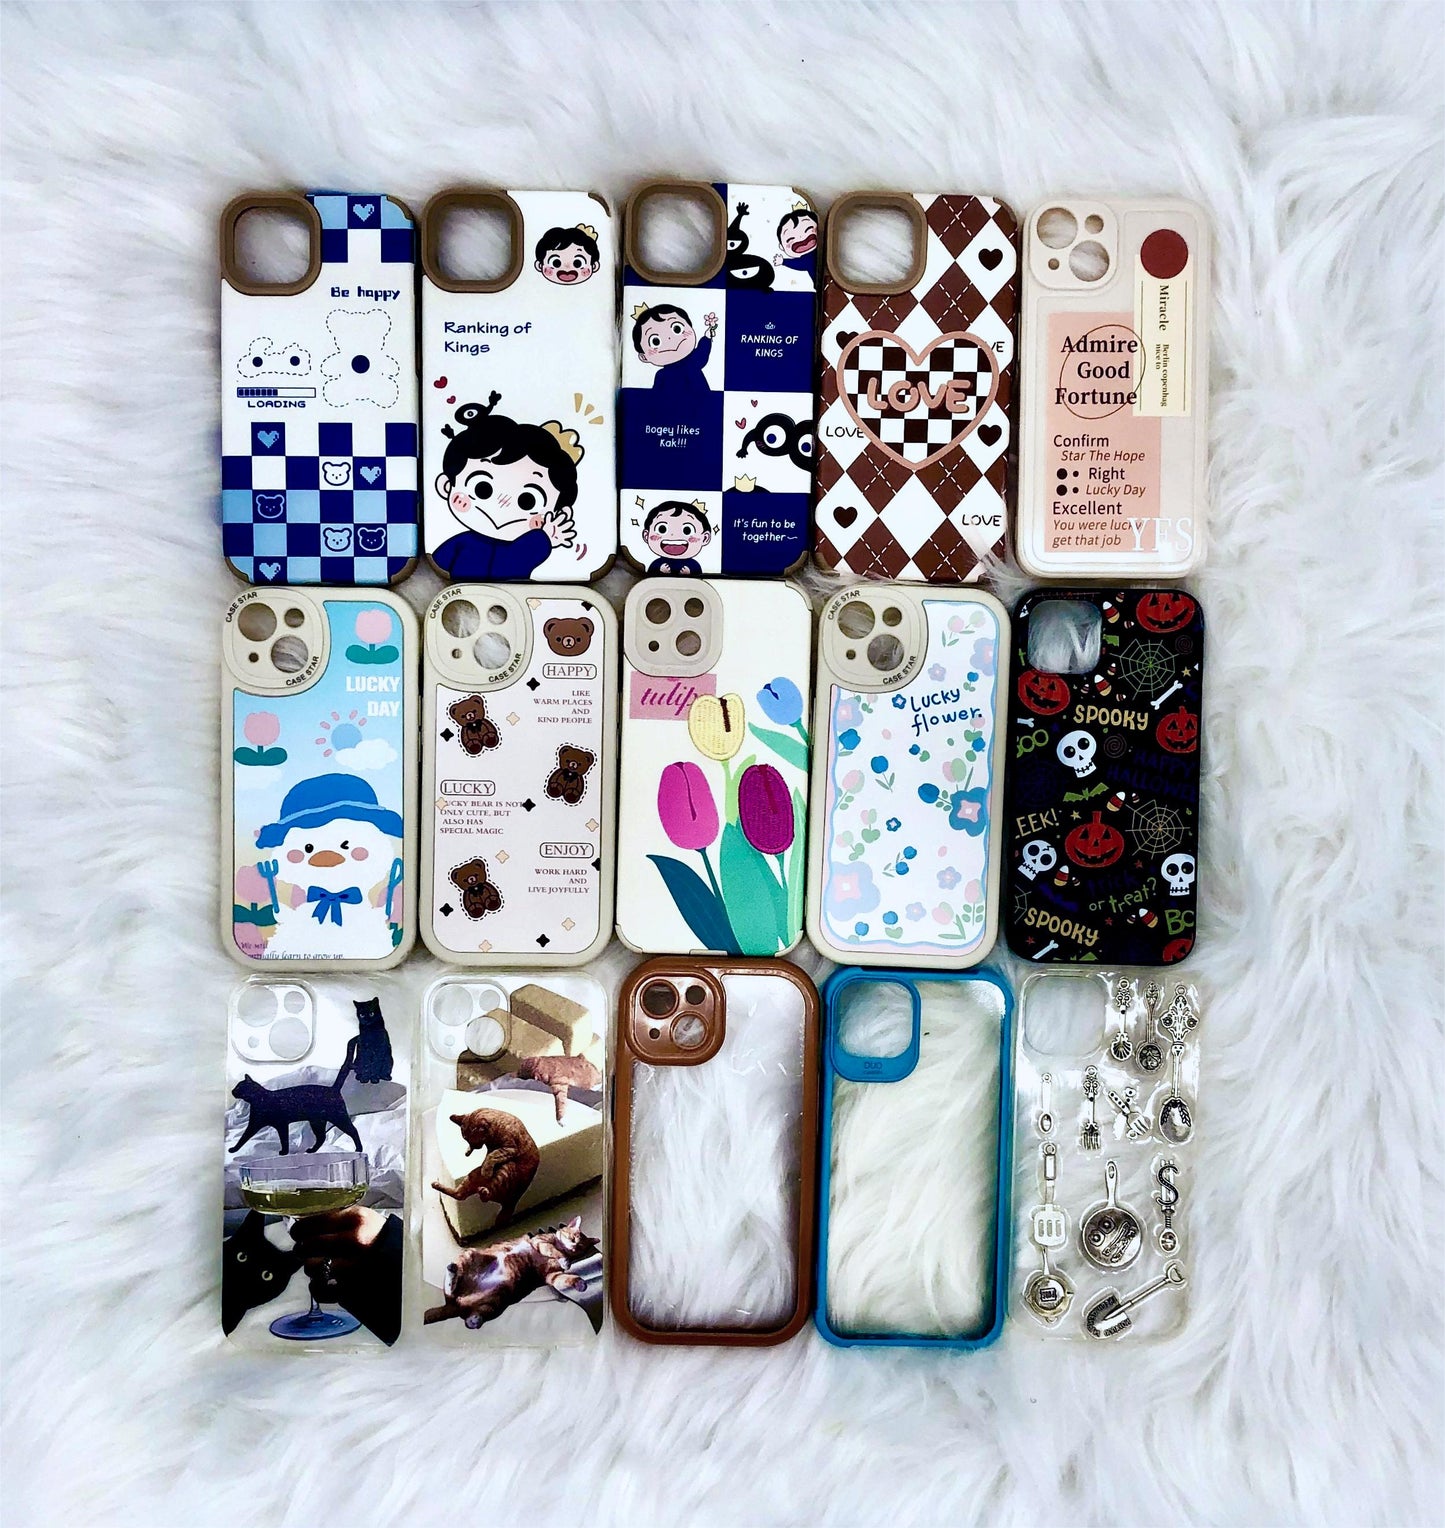 10pcs Random case for iPhone/Samsung! Free Shipping.